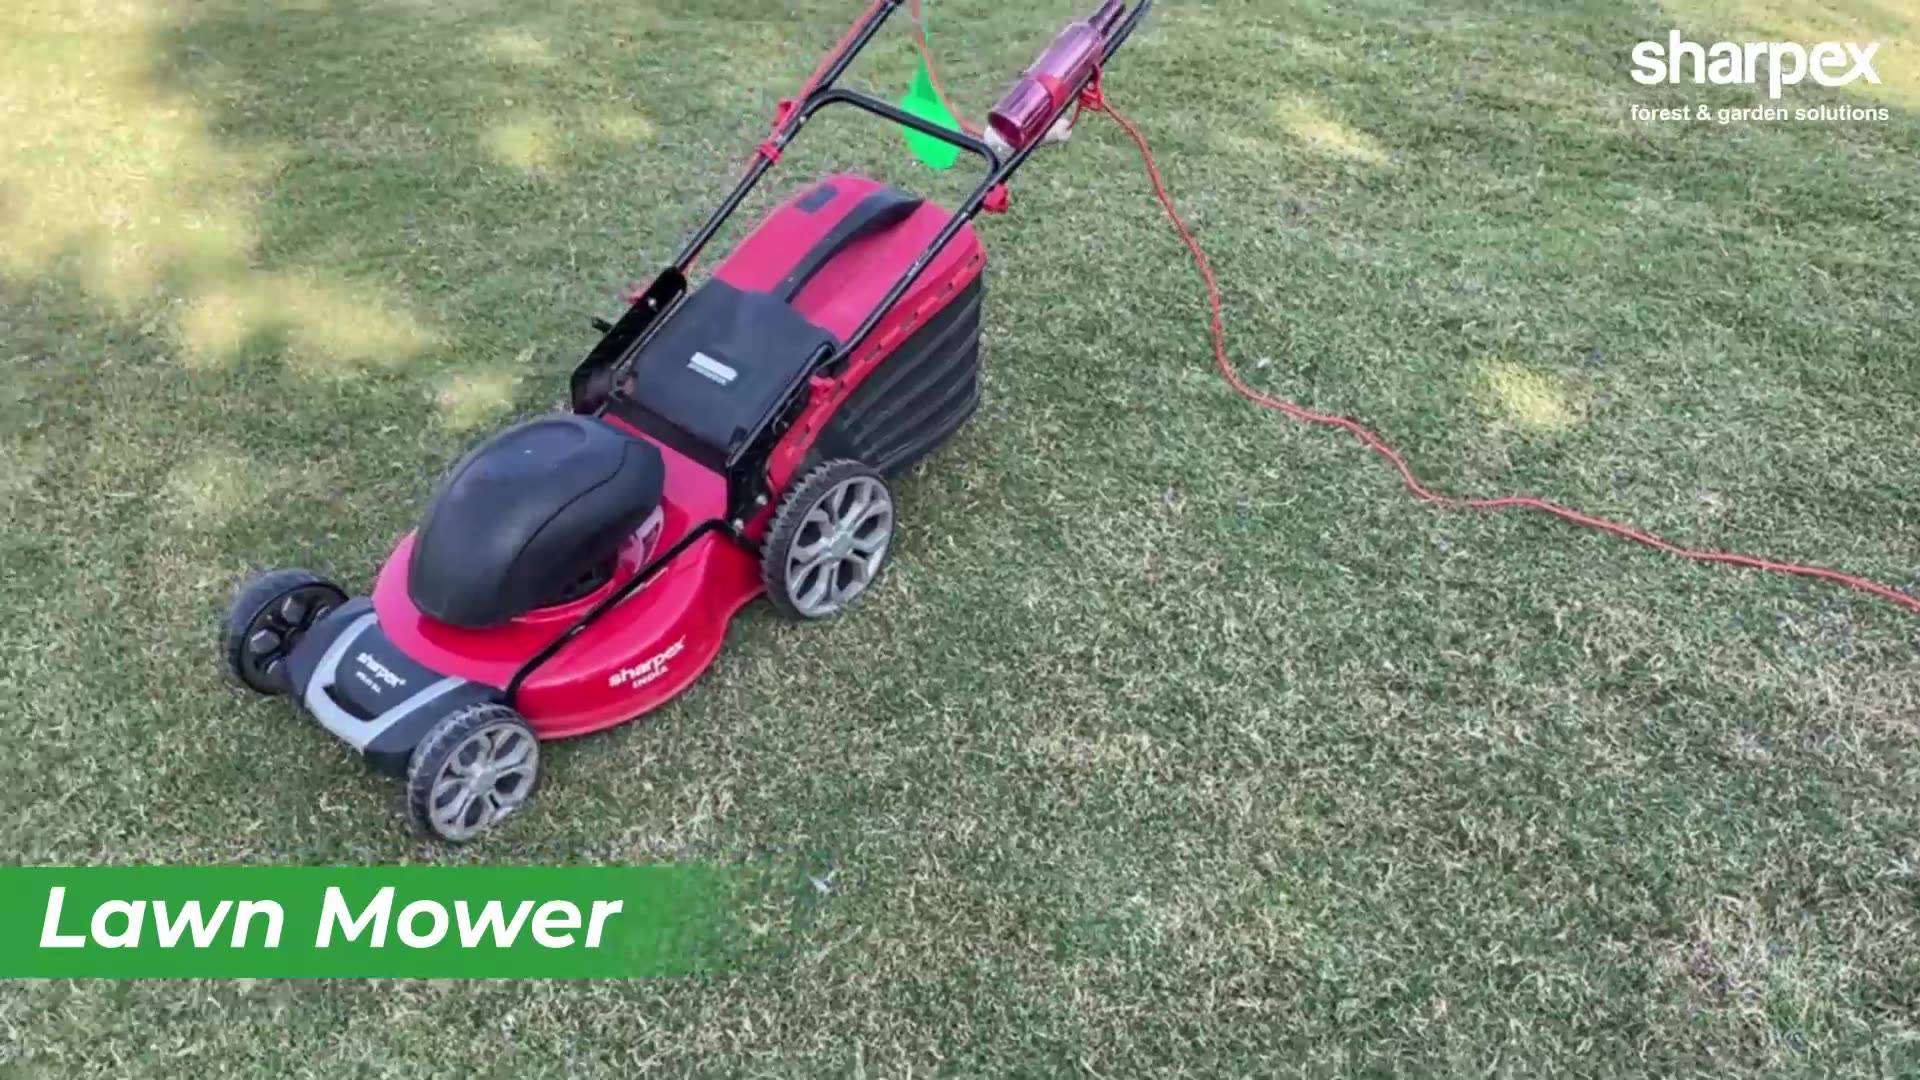 Catch a detailed glimpse of India's largest selling, zero maintainance lawn mower from #SharpexGardeningAndCommunity.

#GardenLovers #GardeningAccessories #GardeningTools #ModernGardeningTools #GardeningProducts #GardenProduct #Sharpex #SharpexIndia